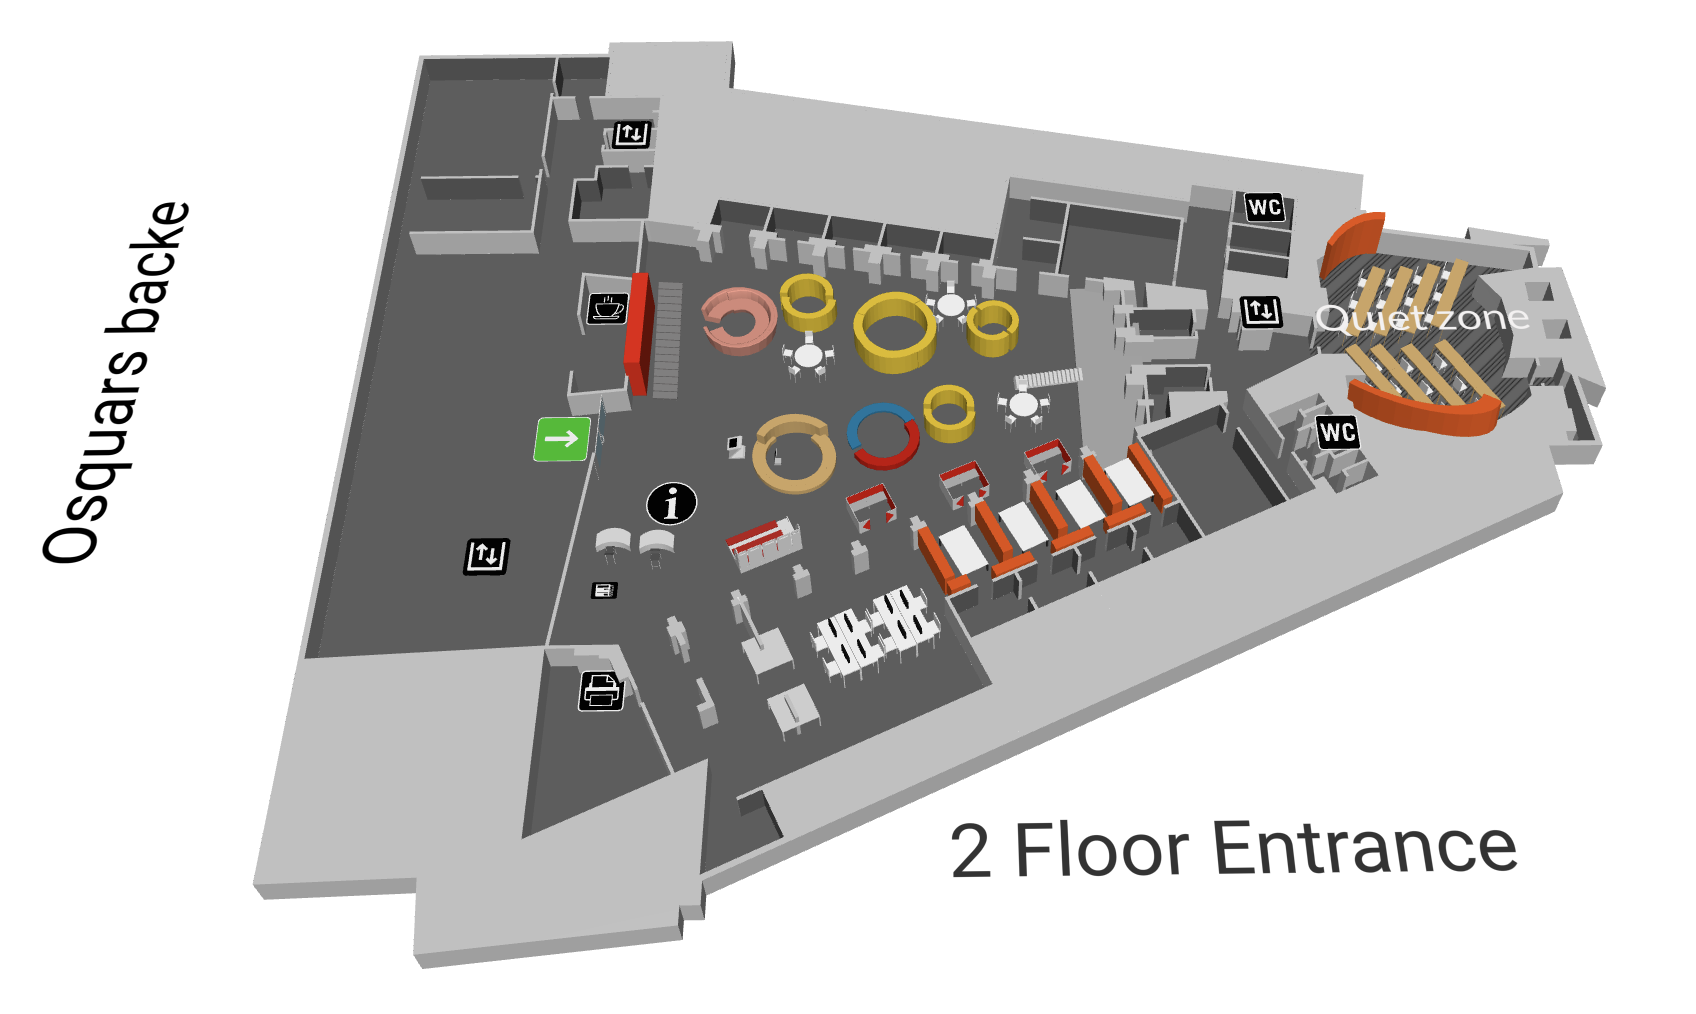 Map of the KTH Main Library